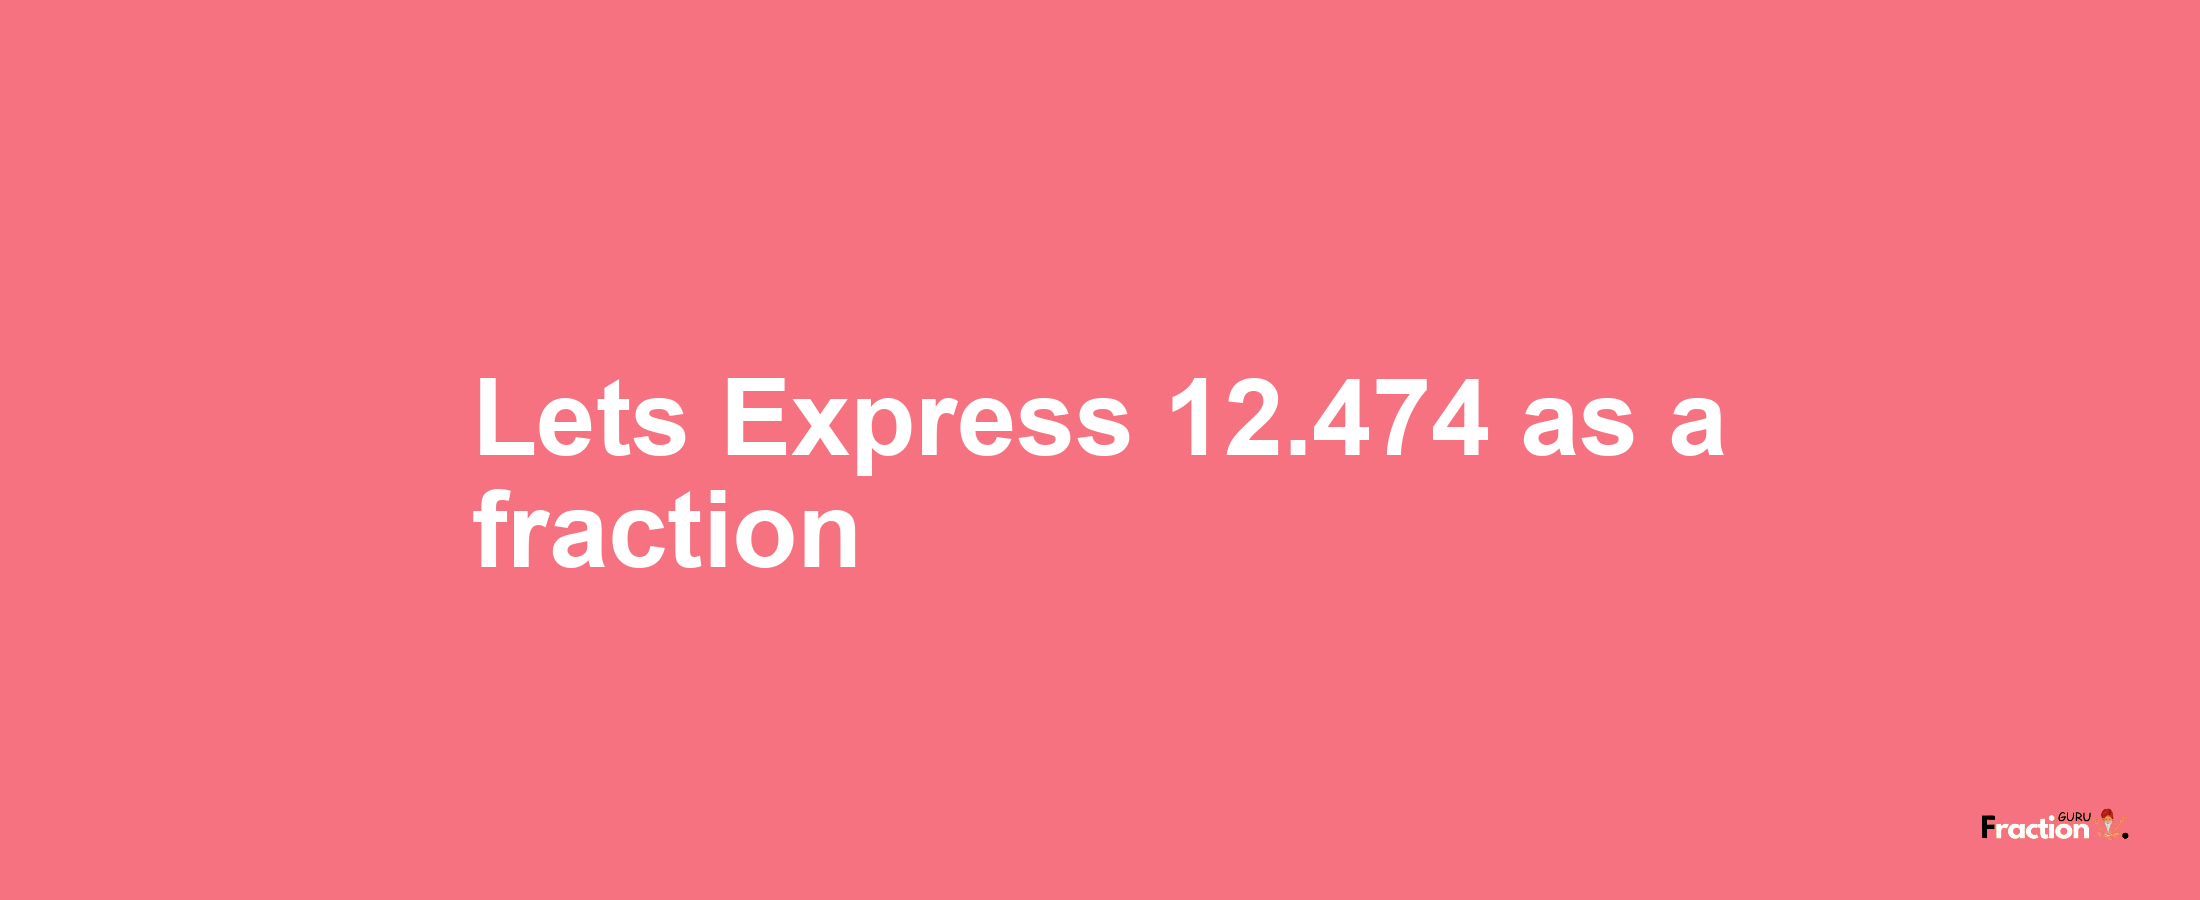 Lets Express 12.474 as afraction